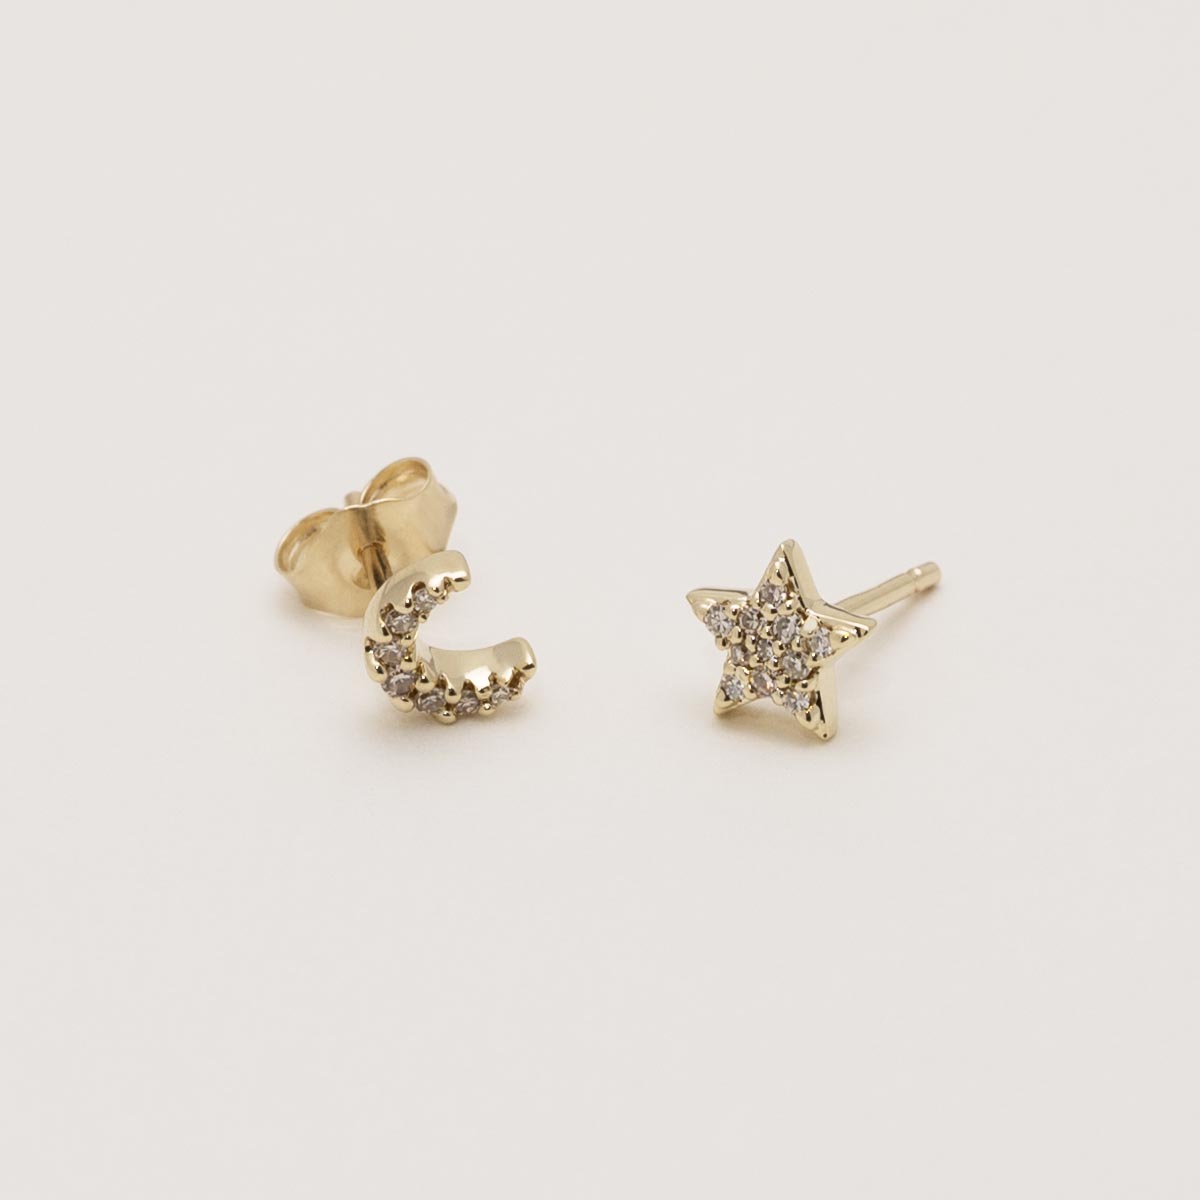 Moon and Star Petite Diamond Stud Earrings in 10kt Yellow Gold (1/10ct tw)